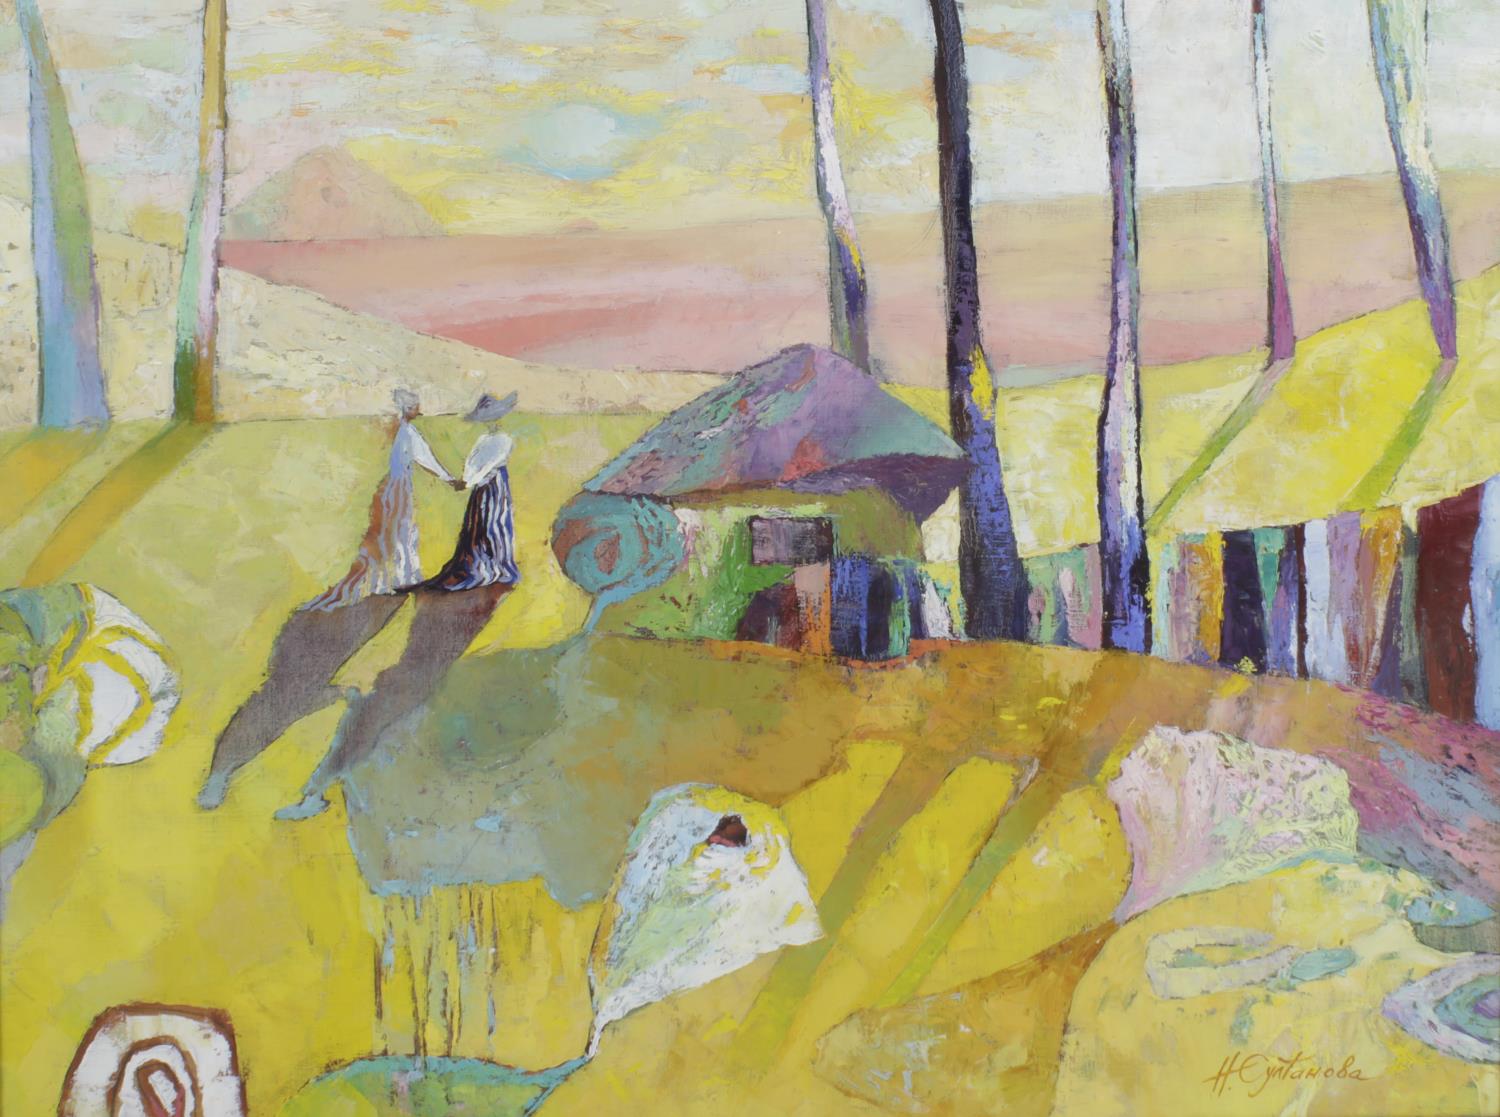 ARR Natalya Sultanova, (modern), 'The Meeting', two figures in a landscape, oil on canvas, signed in